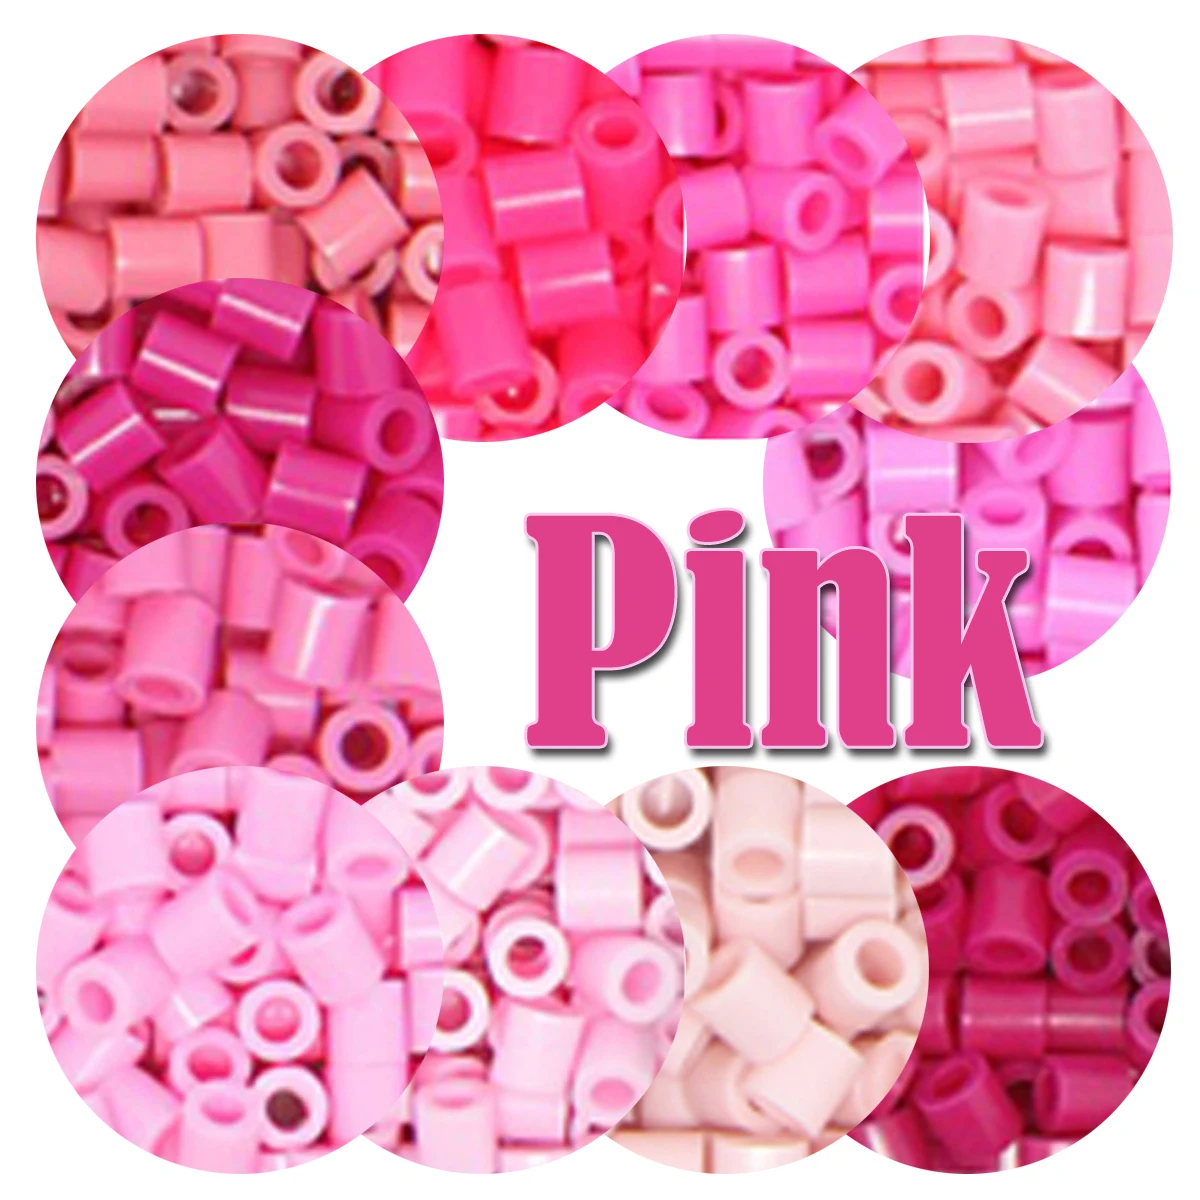 Pink Color 5mm Beads 1000PCS Pixel Art Hama Beads for Kids Iron Fuse Beads Diy Puzzles Gift Children Toys